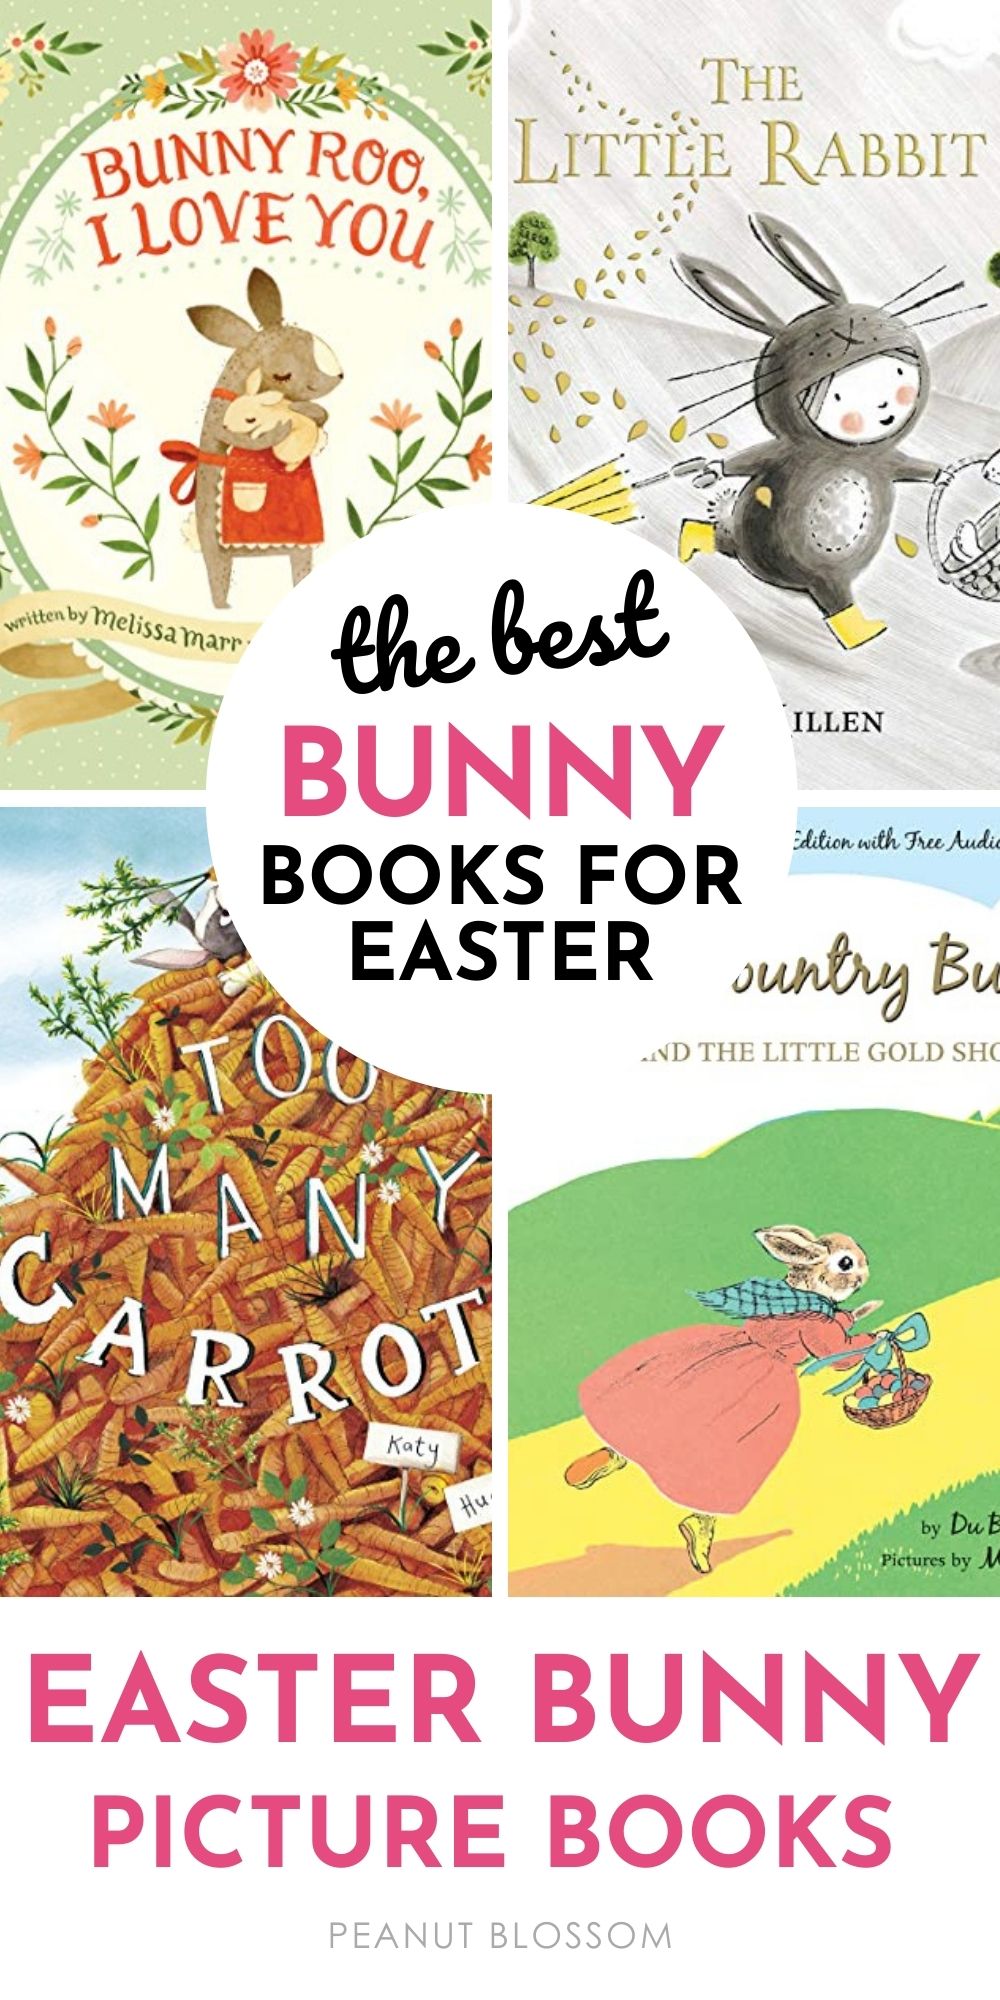 A photo collage shows four of the best bunny picture books for Easter.